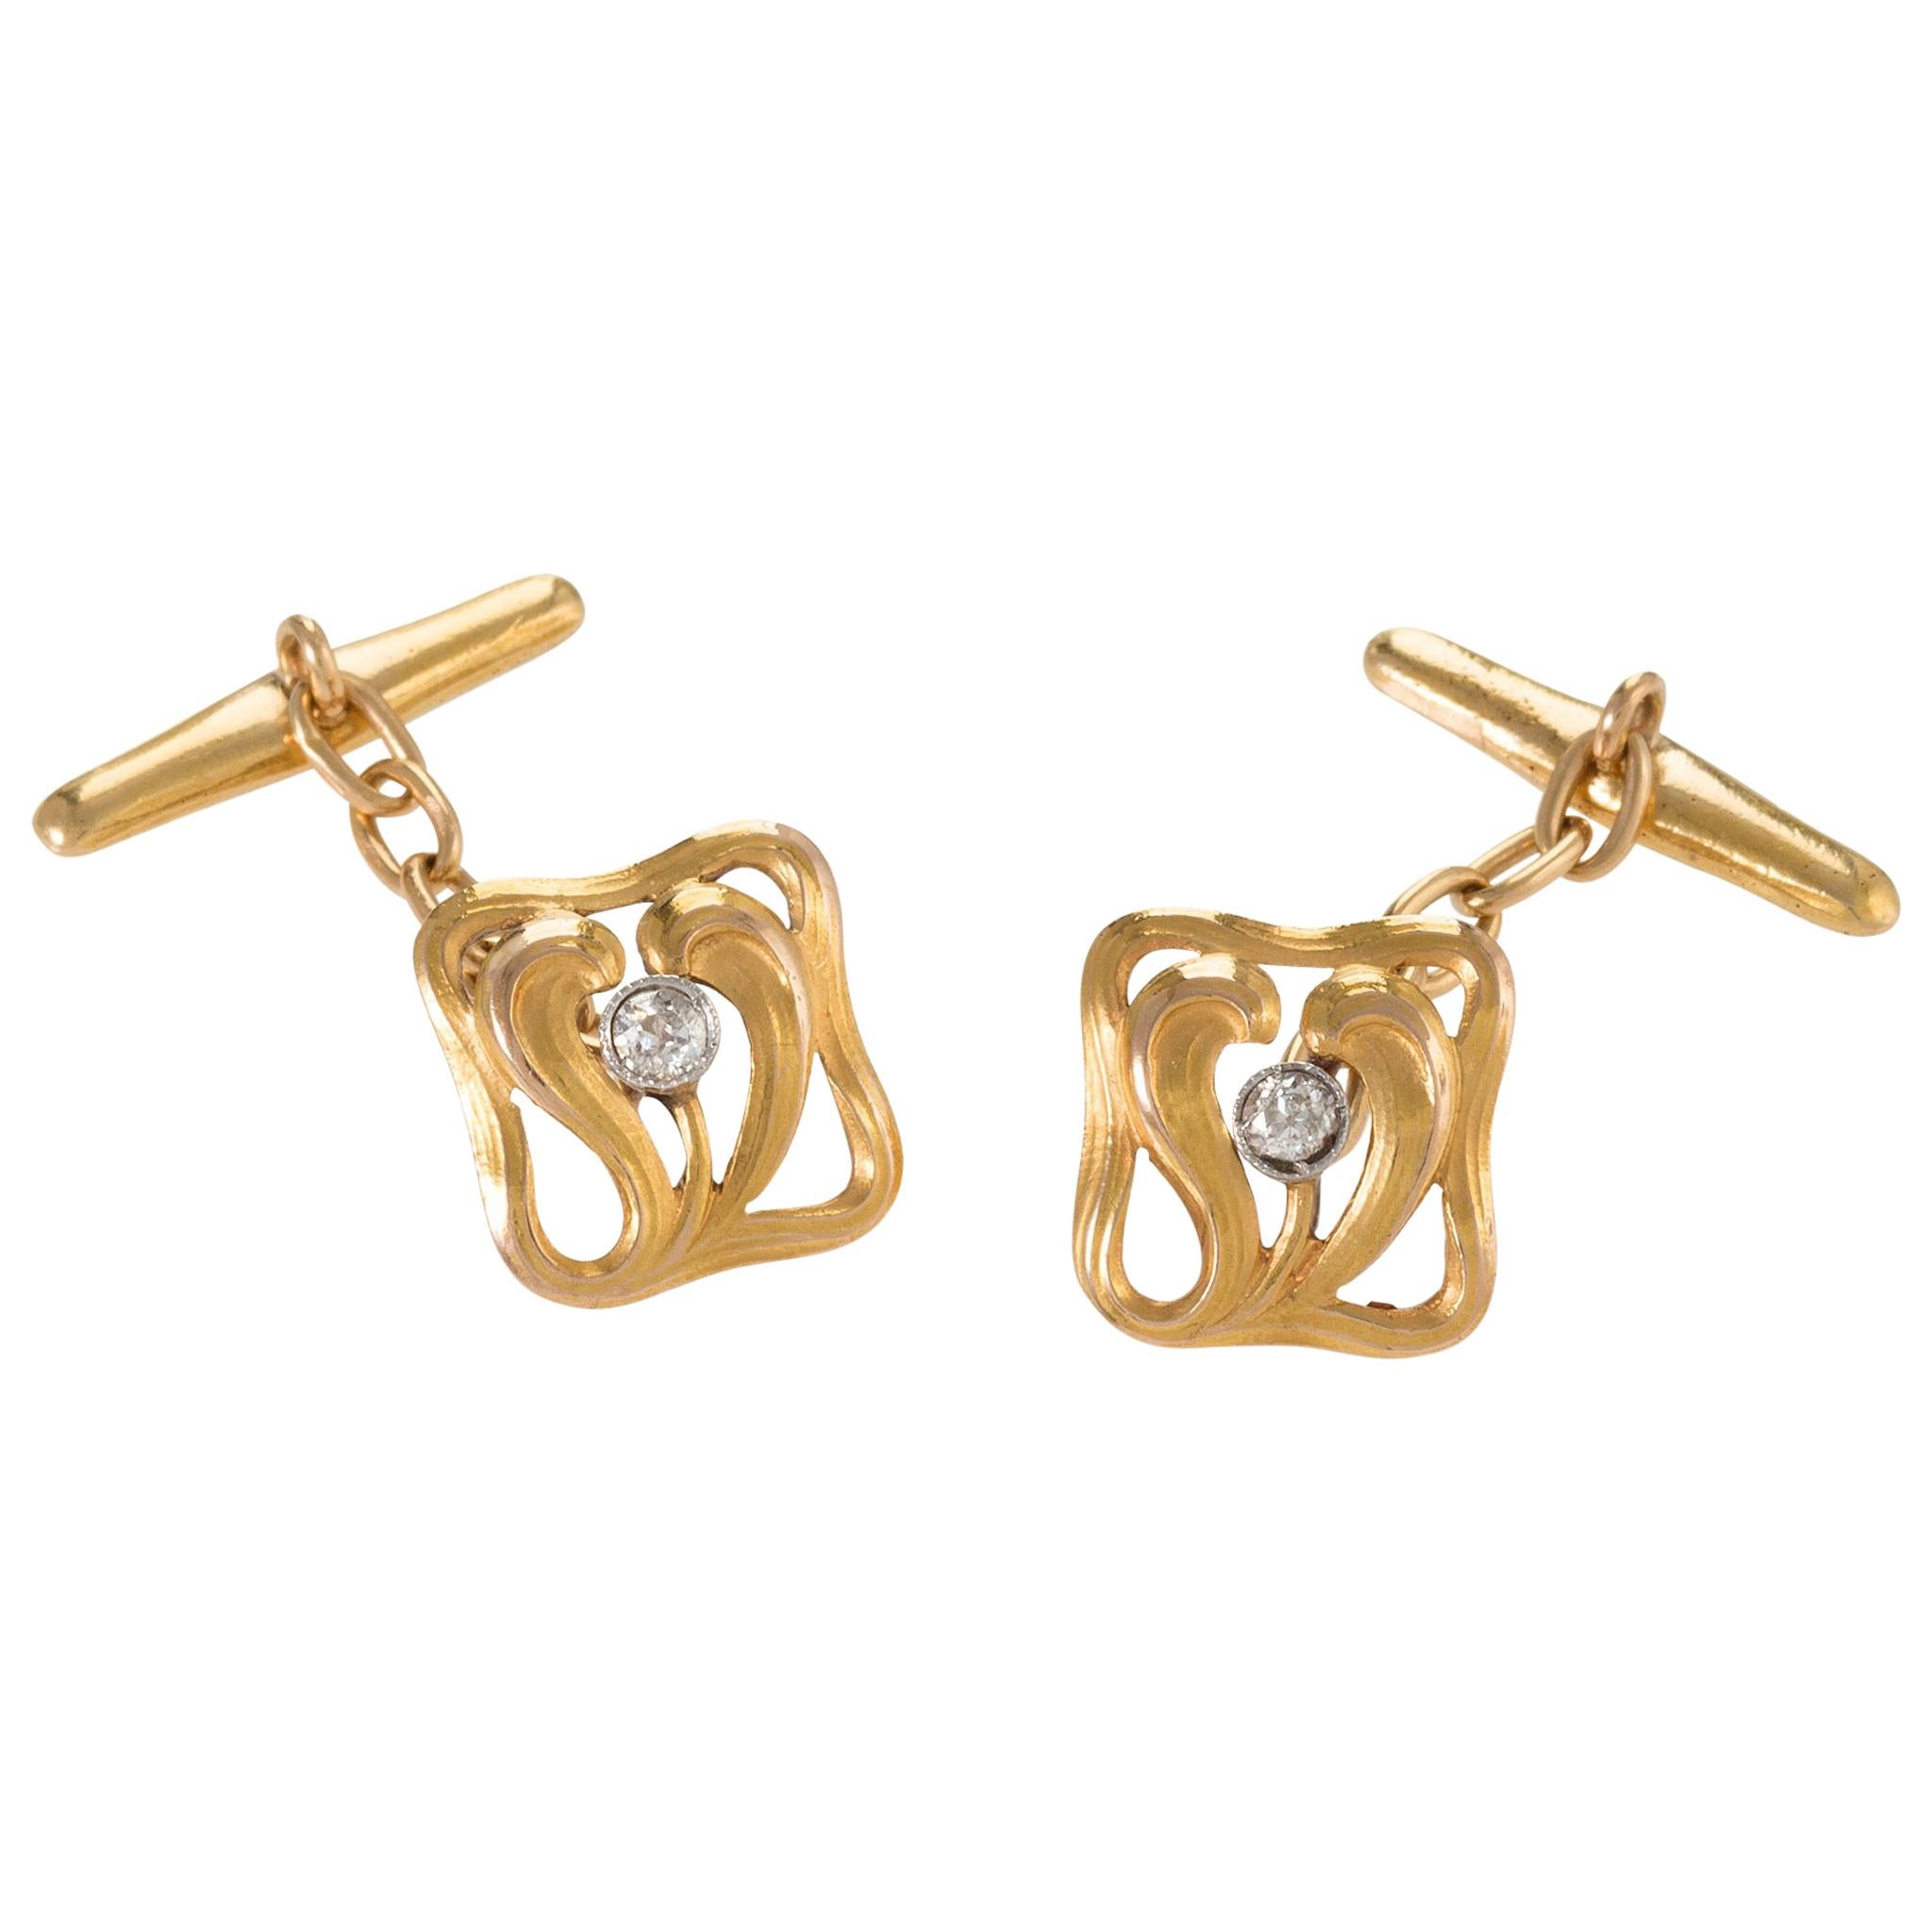 Chased Gold and Diamond Cuff Links